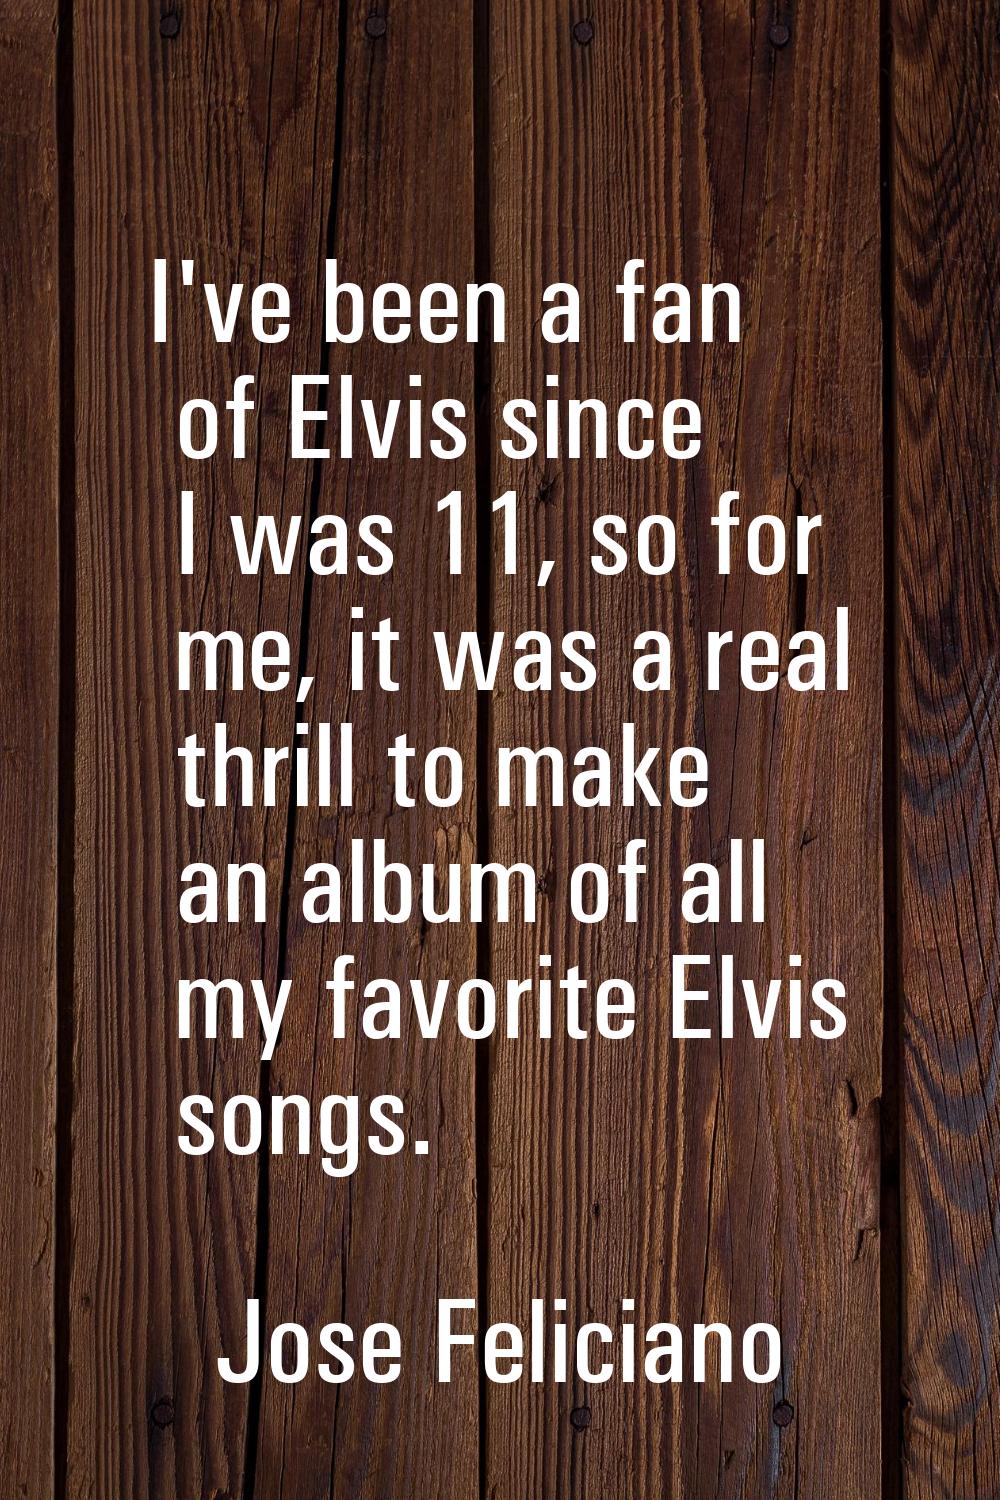 I've been a fan of Elvis since I was 11, so for me, it was a real thrill to make an album of all my